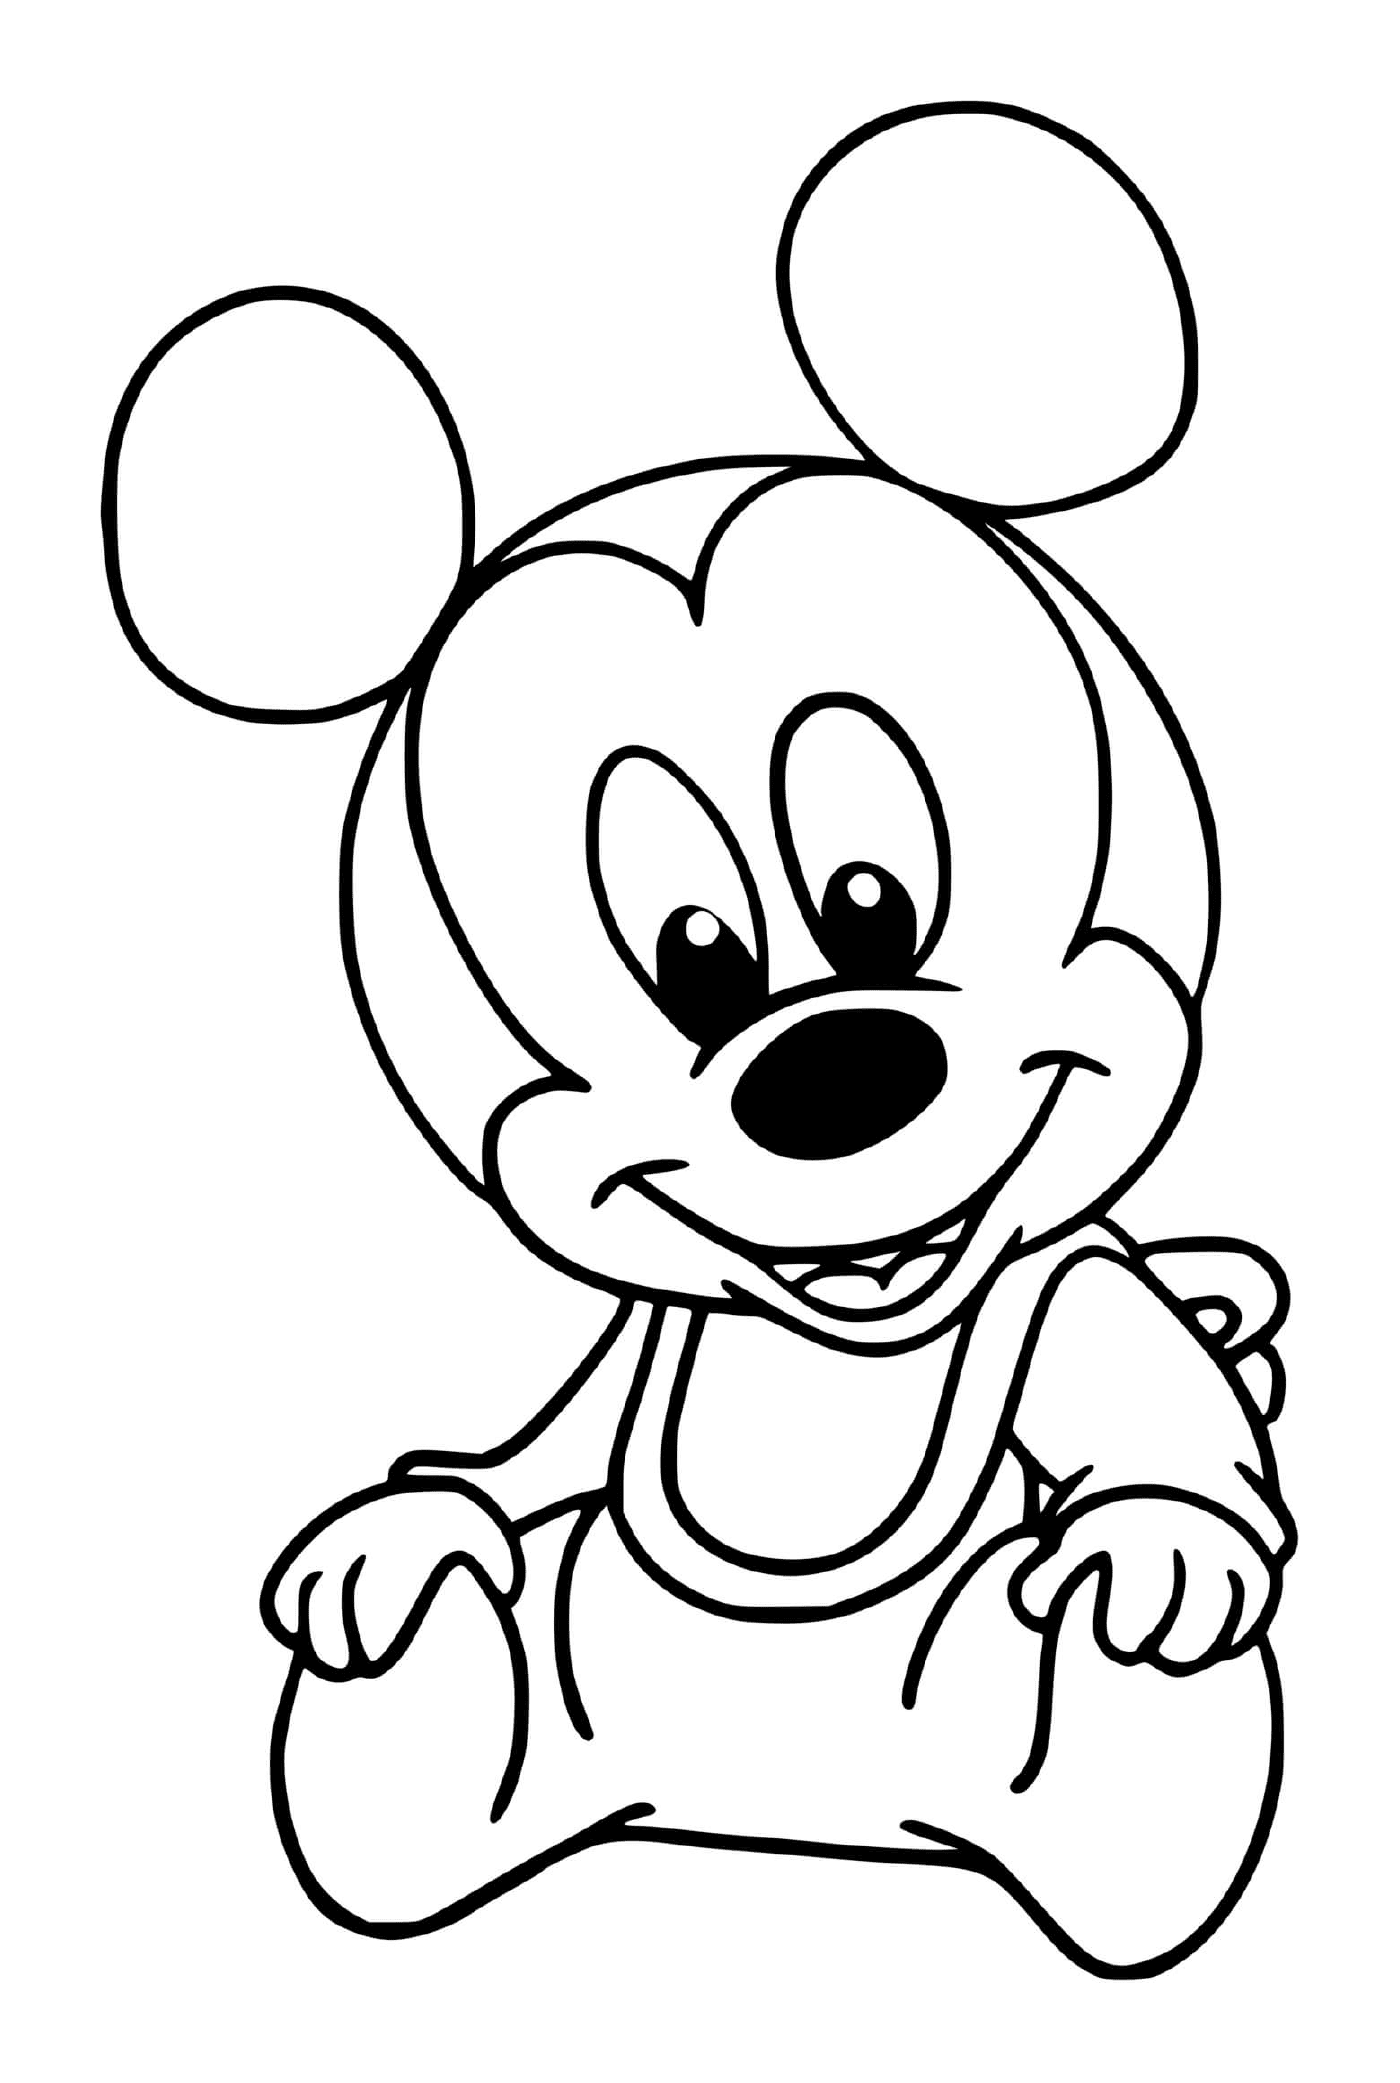  Mickey Mouse baby 